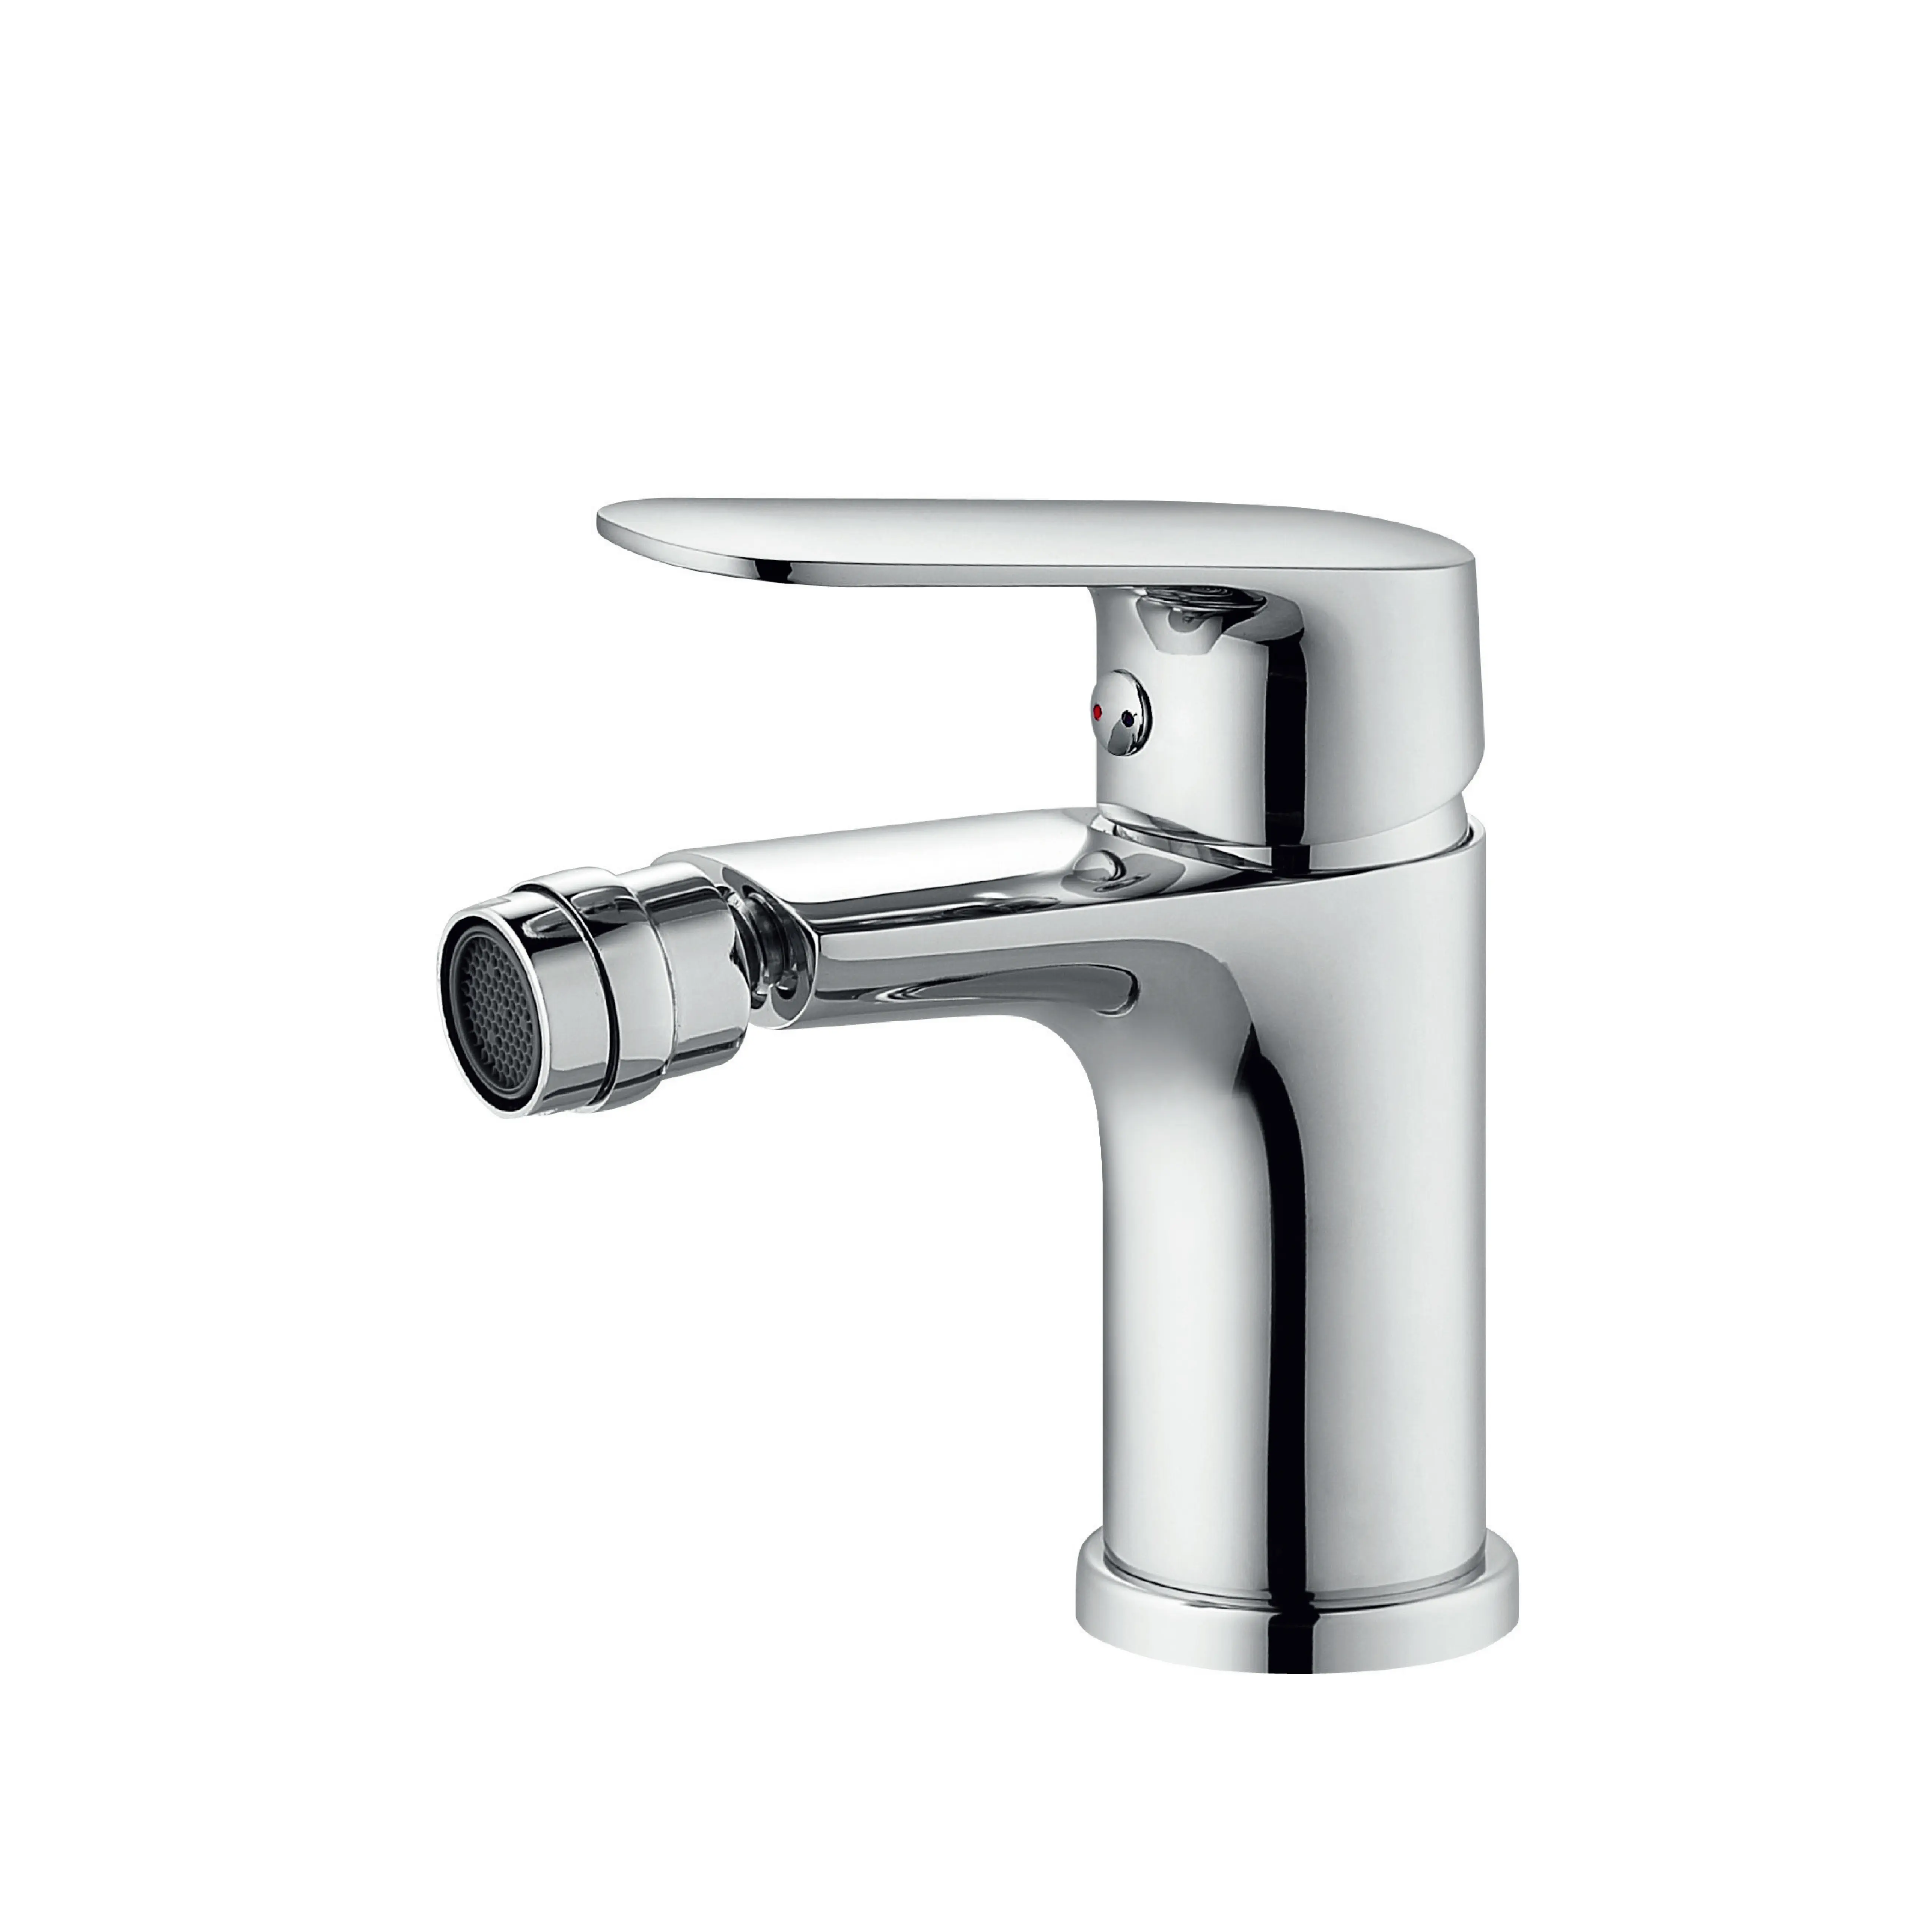 High Quality Certificated Single Handle Deck Mounted Bathroom Bidet Faucet